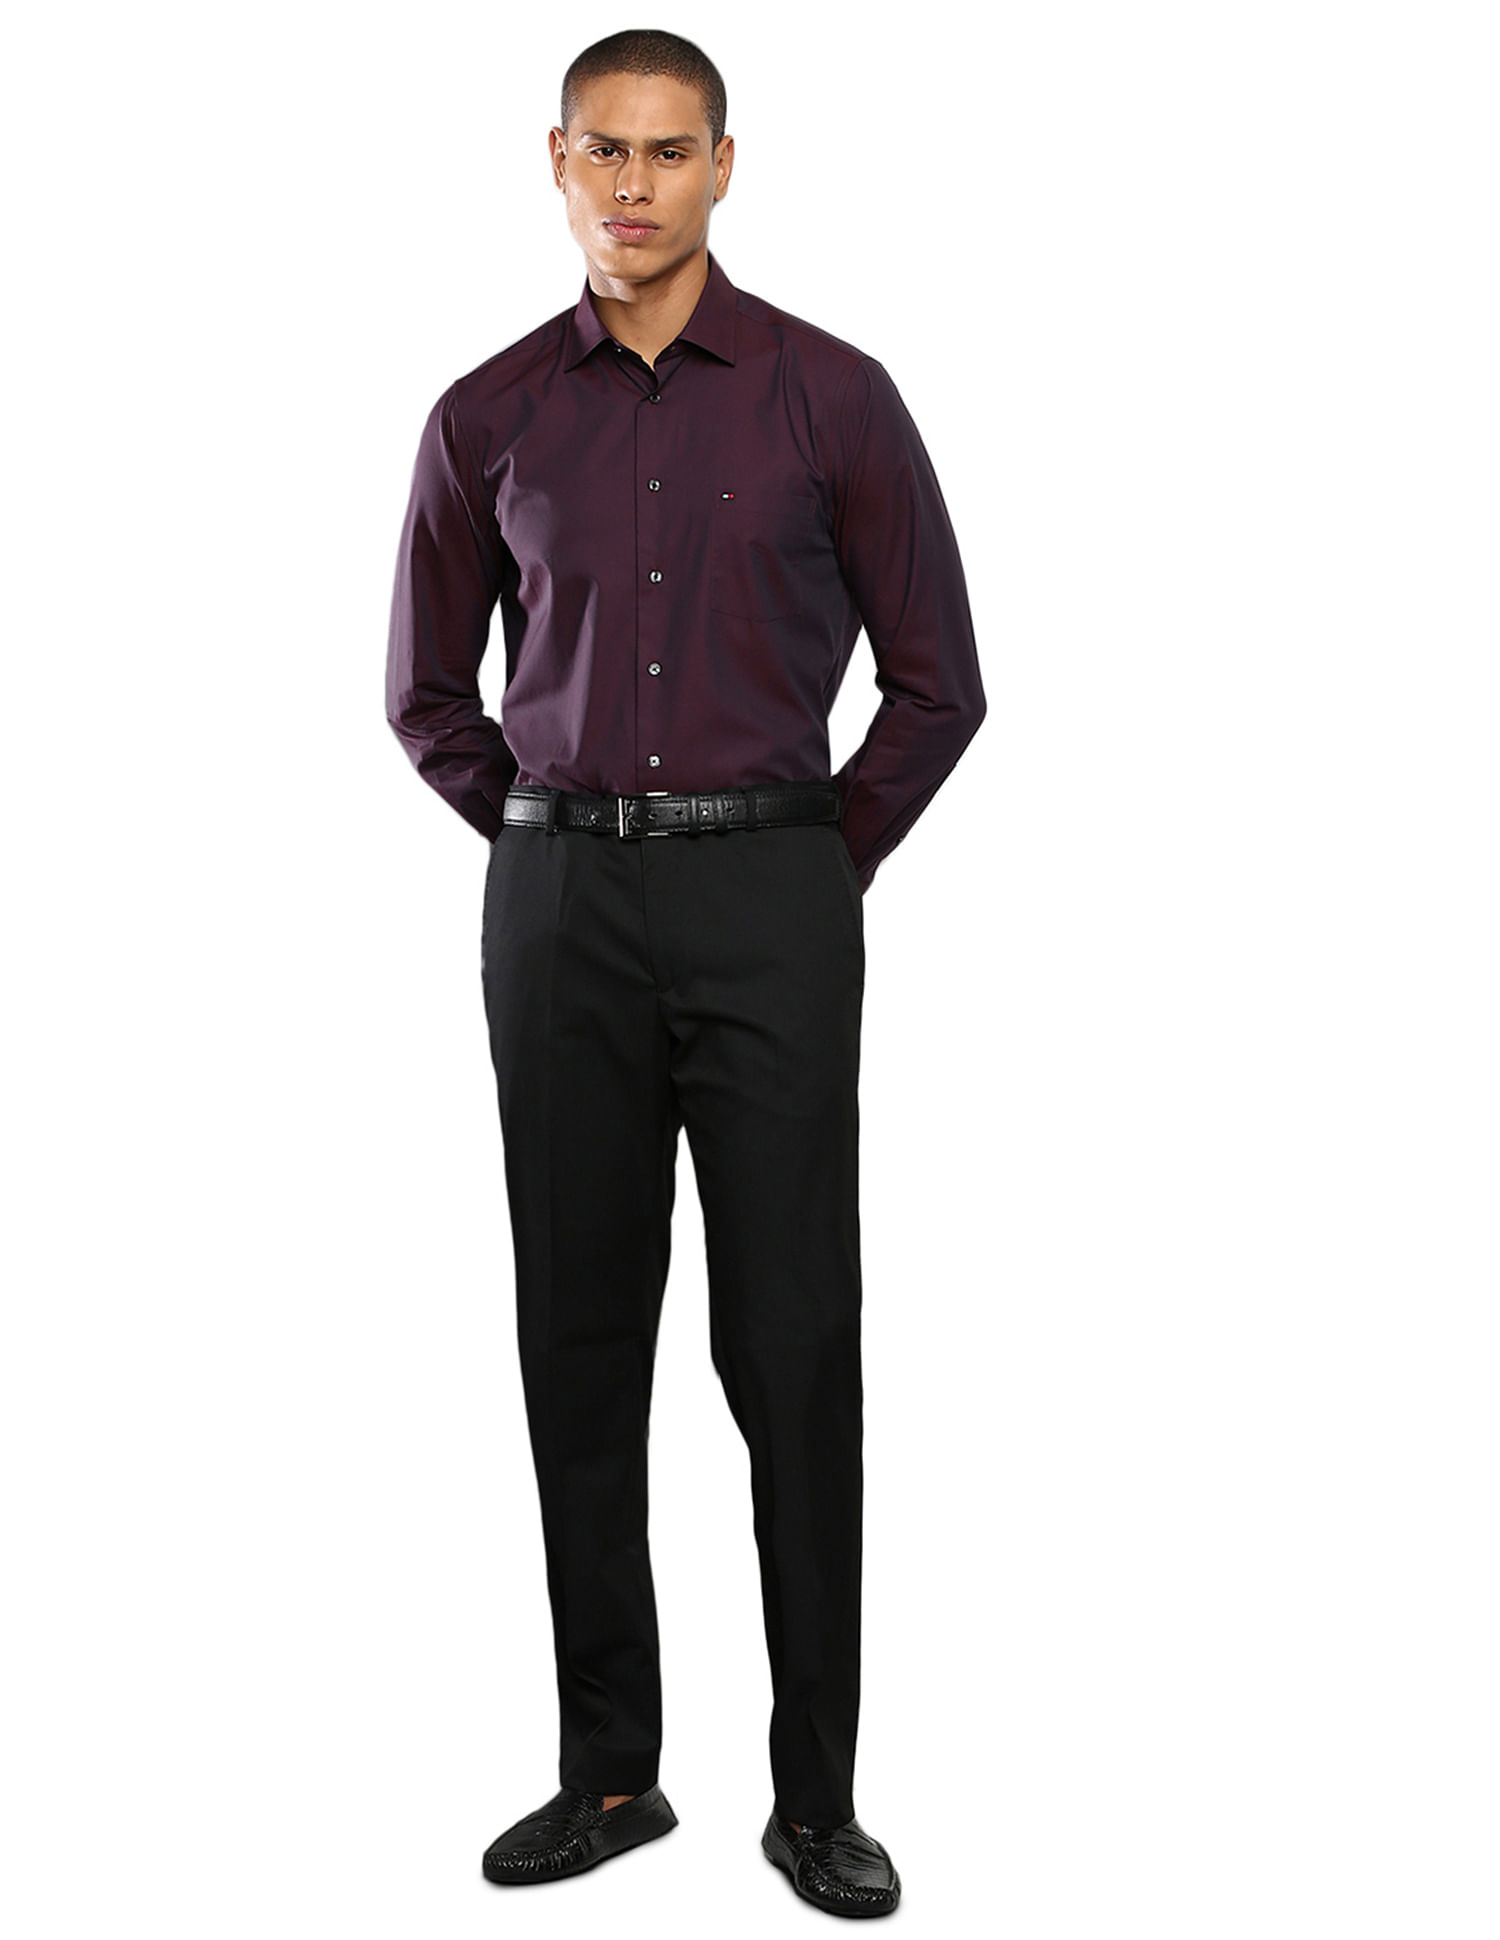 7 Shirt Colors To Wear With Black Pants And Brown Shoes  Ready Sleek